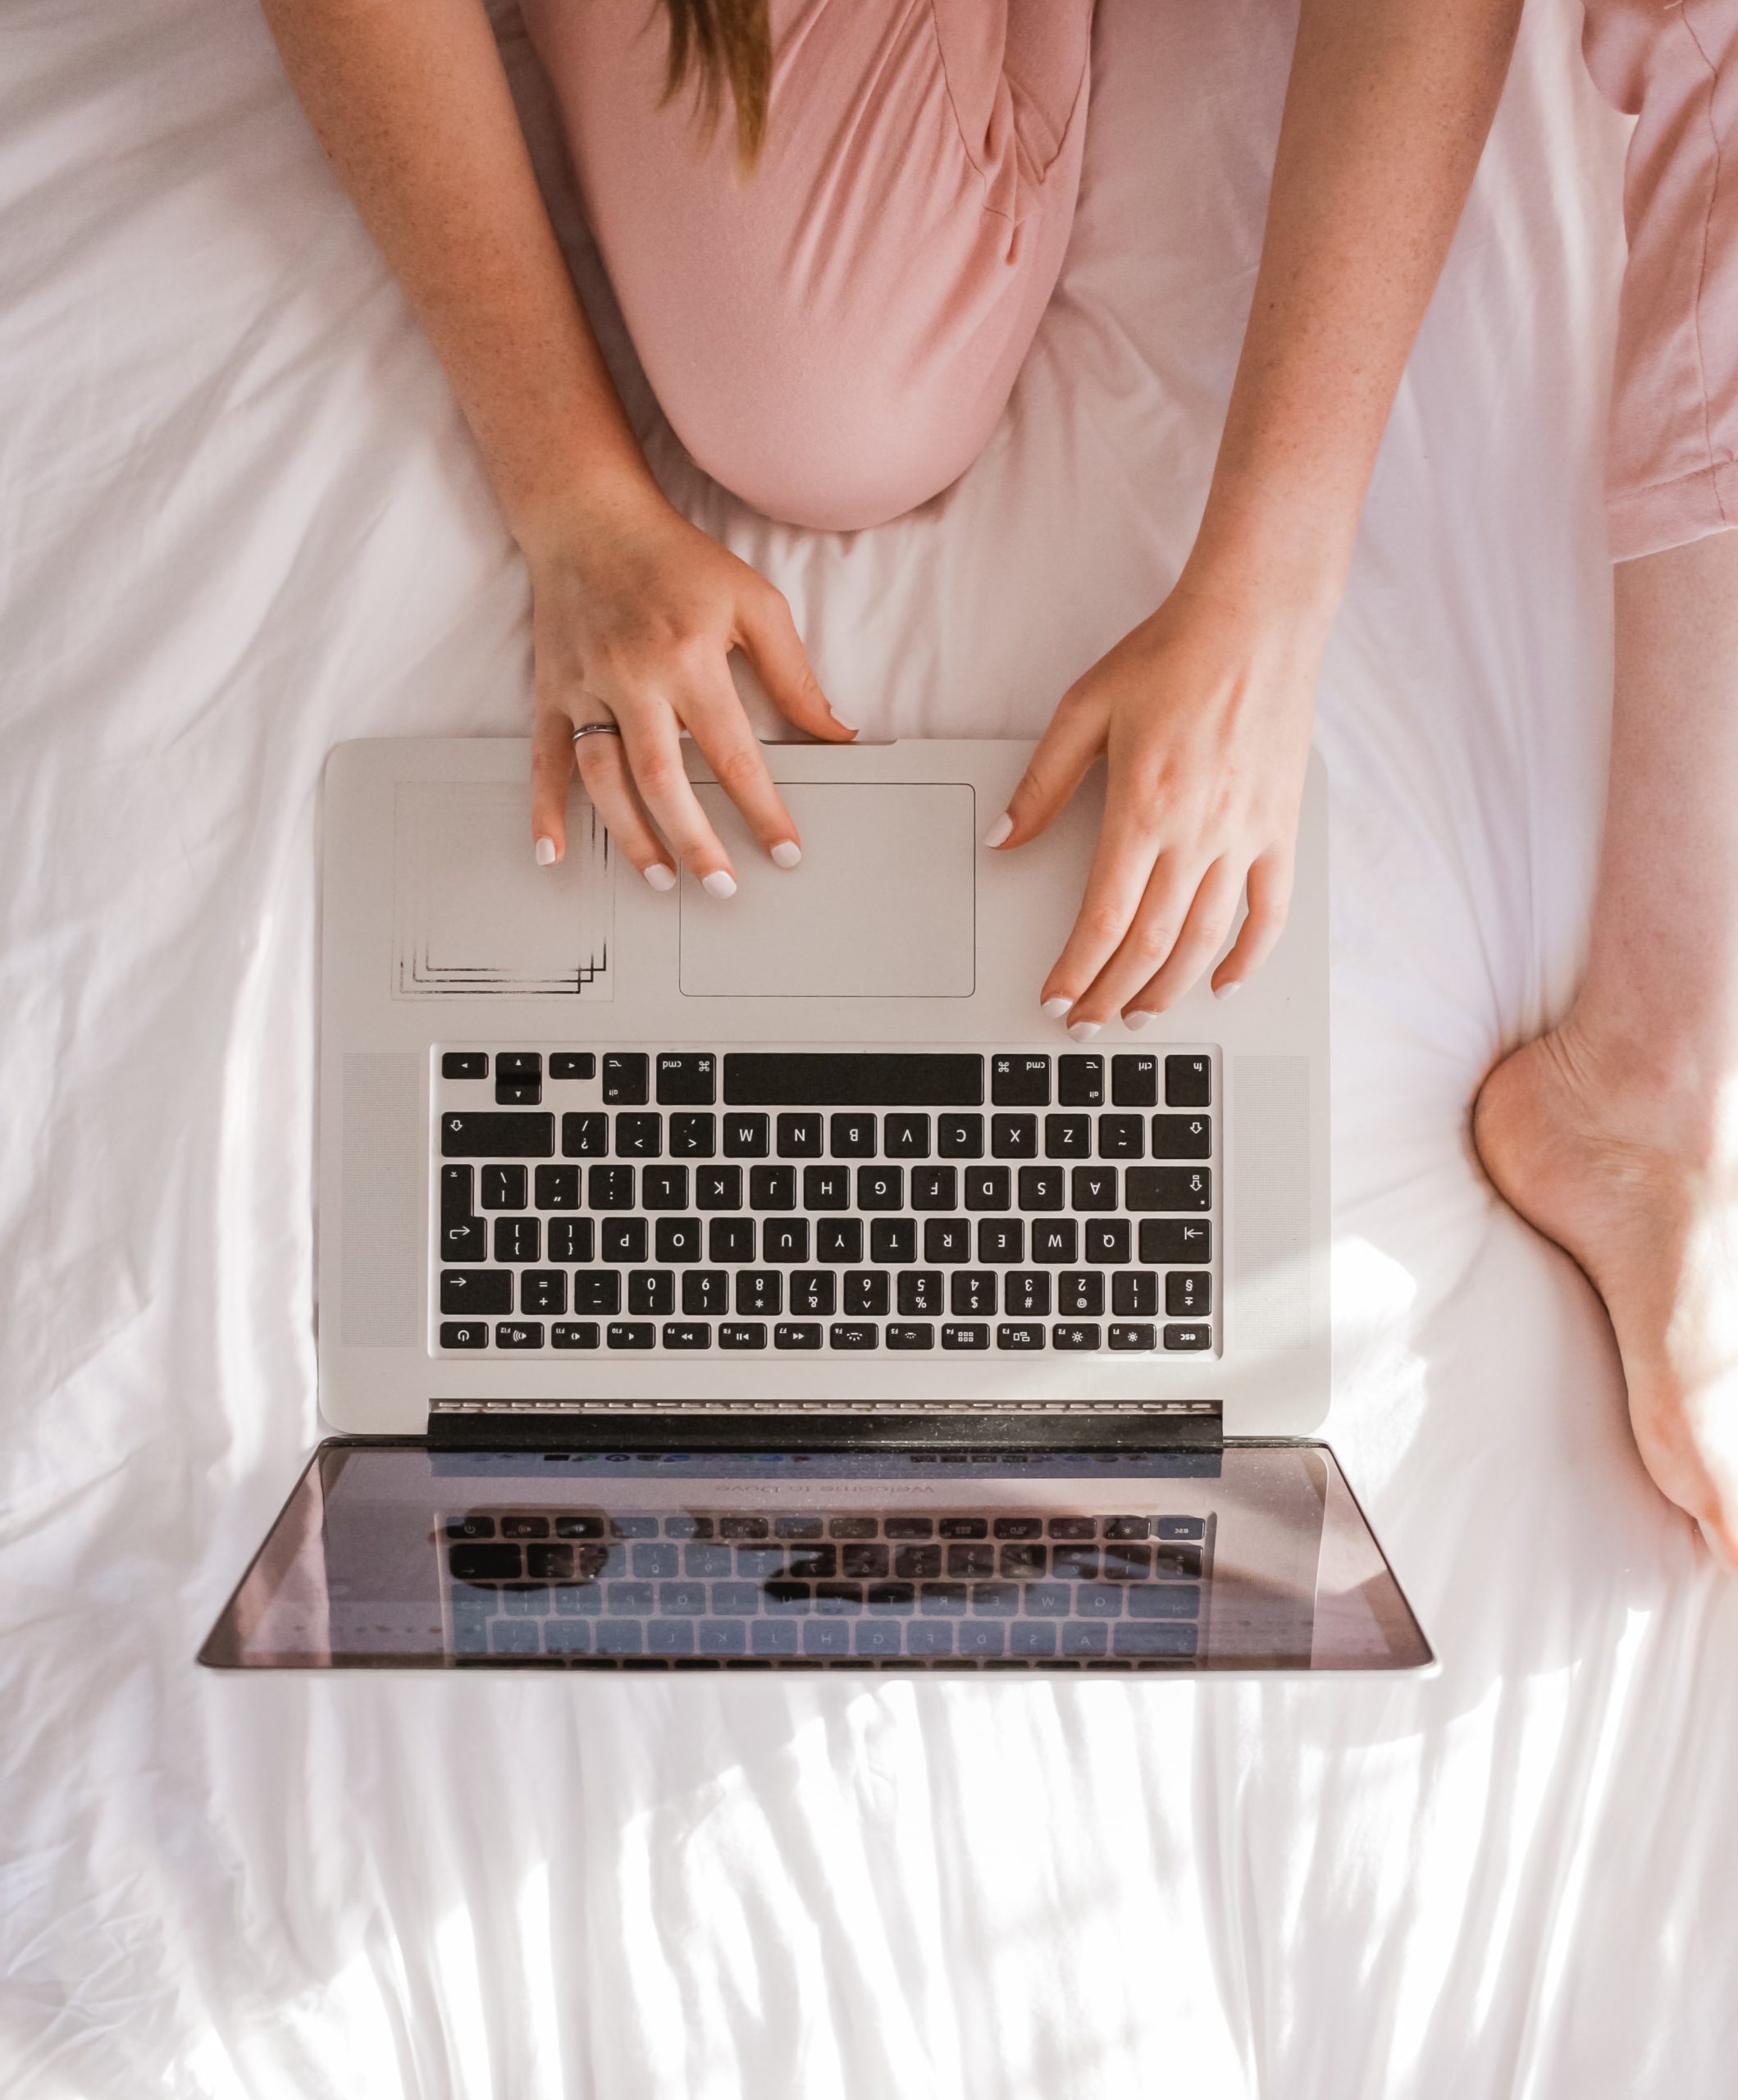 Girl in pink pants looking at laptop on white bedspread